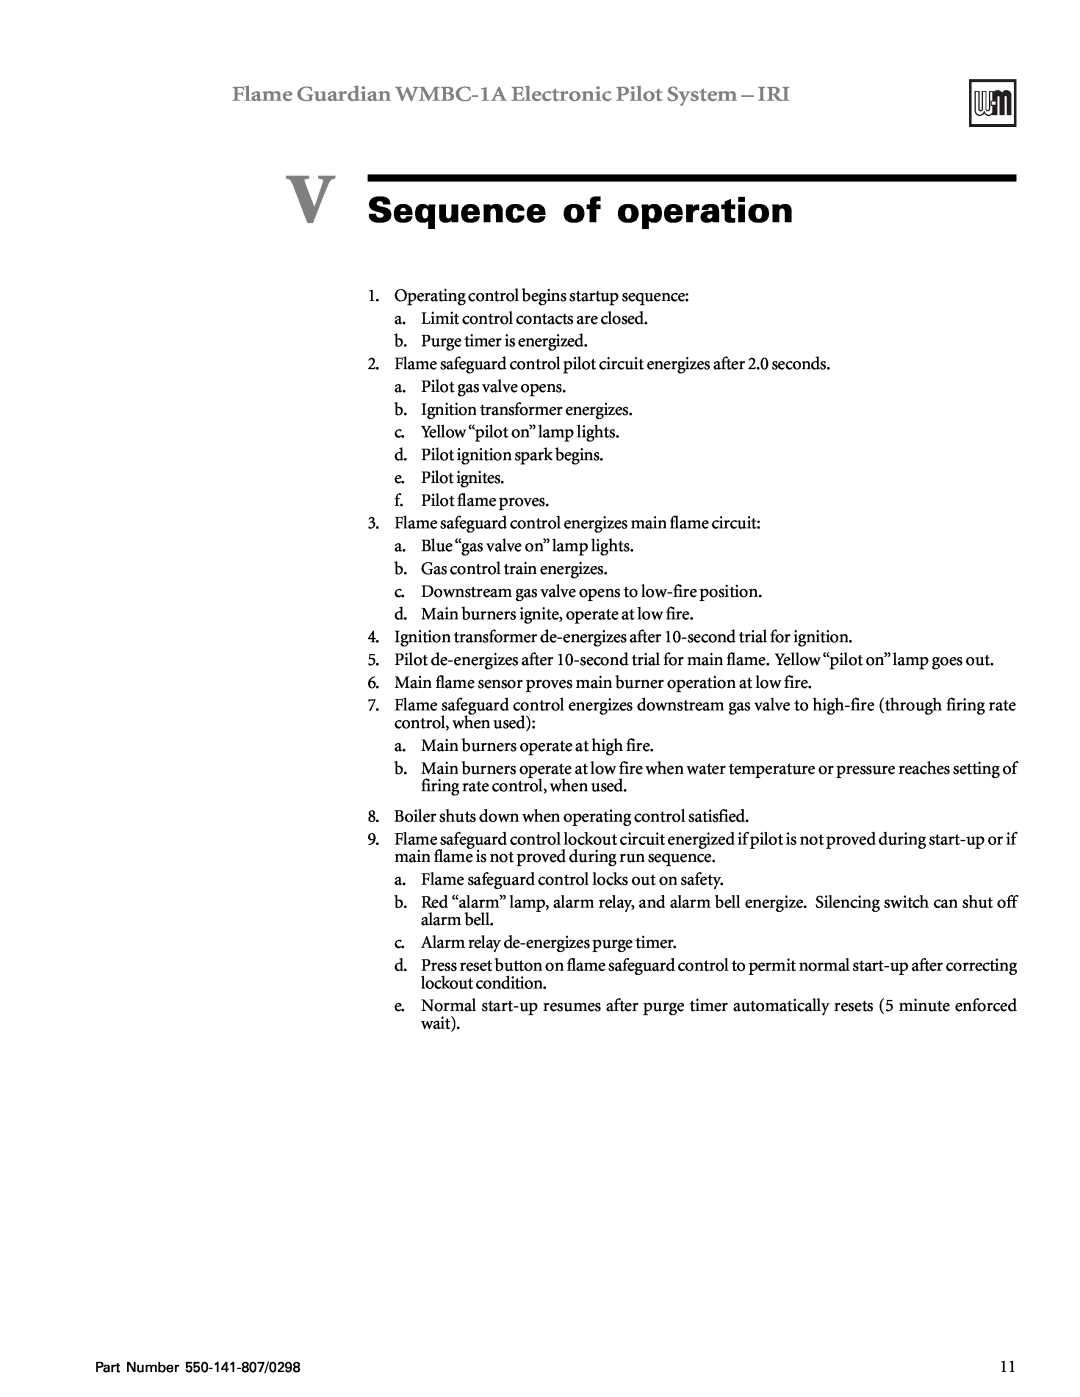 Weil-McLain WMBC-1A manual V Sequence of operation 